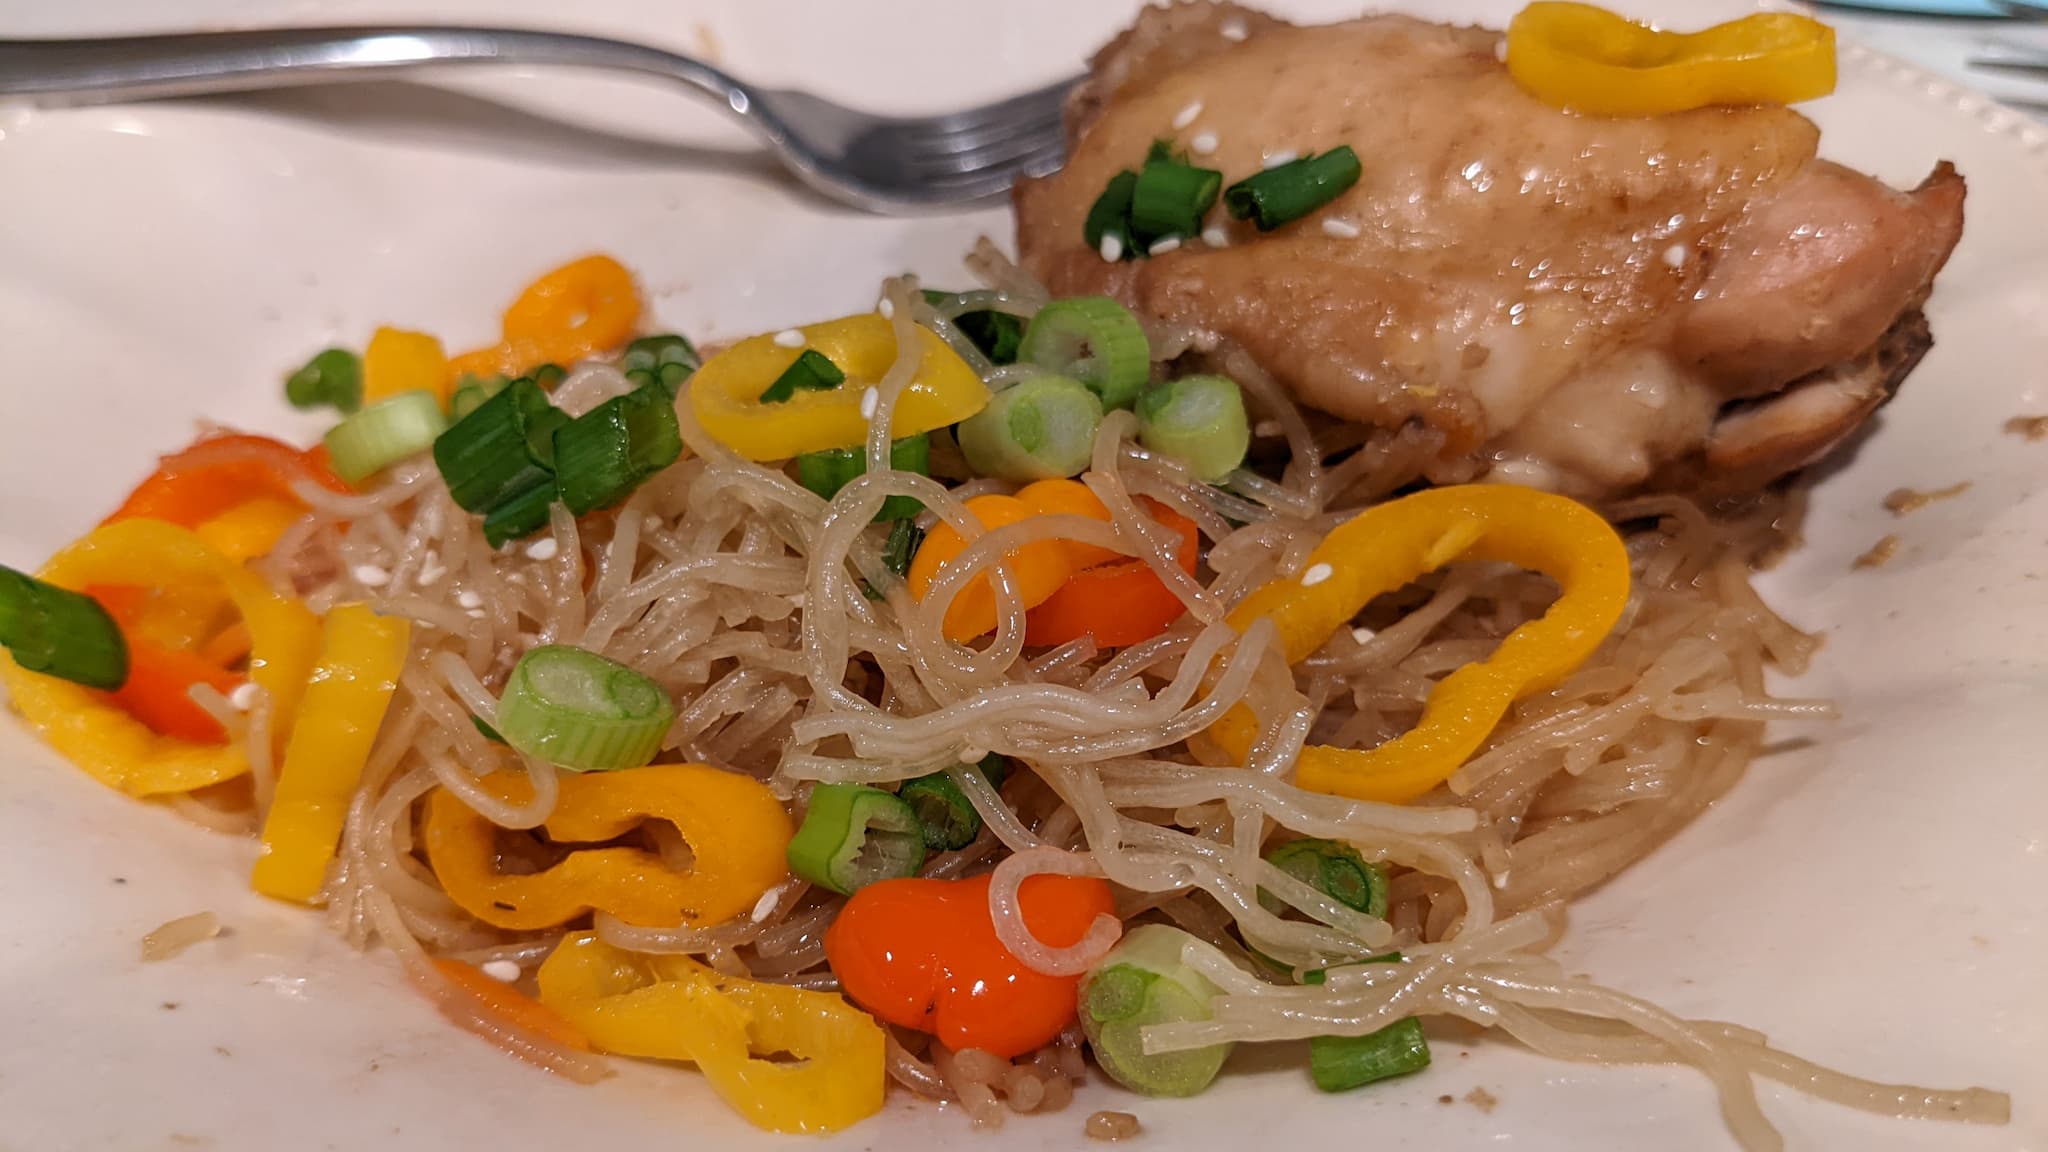 plate with noodles, colorful peppers, green onions, and a piece of roasted chicken.